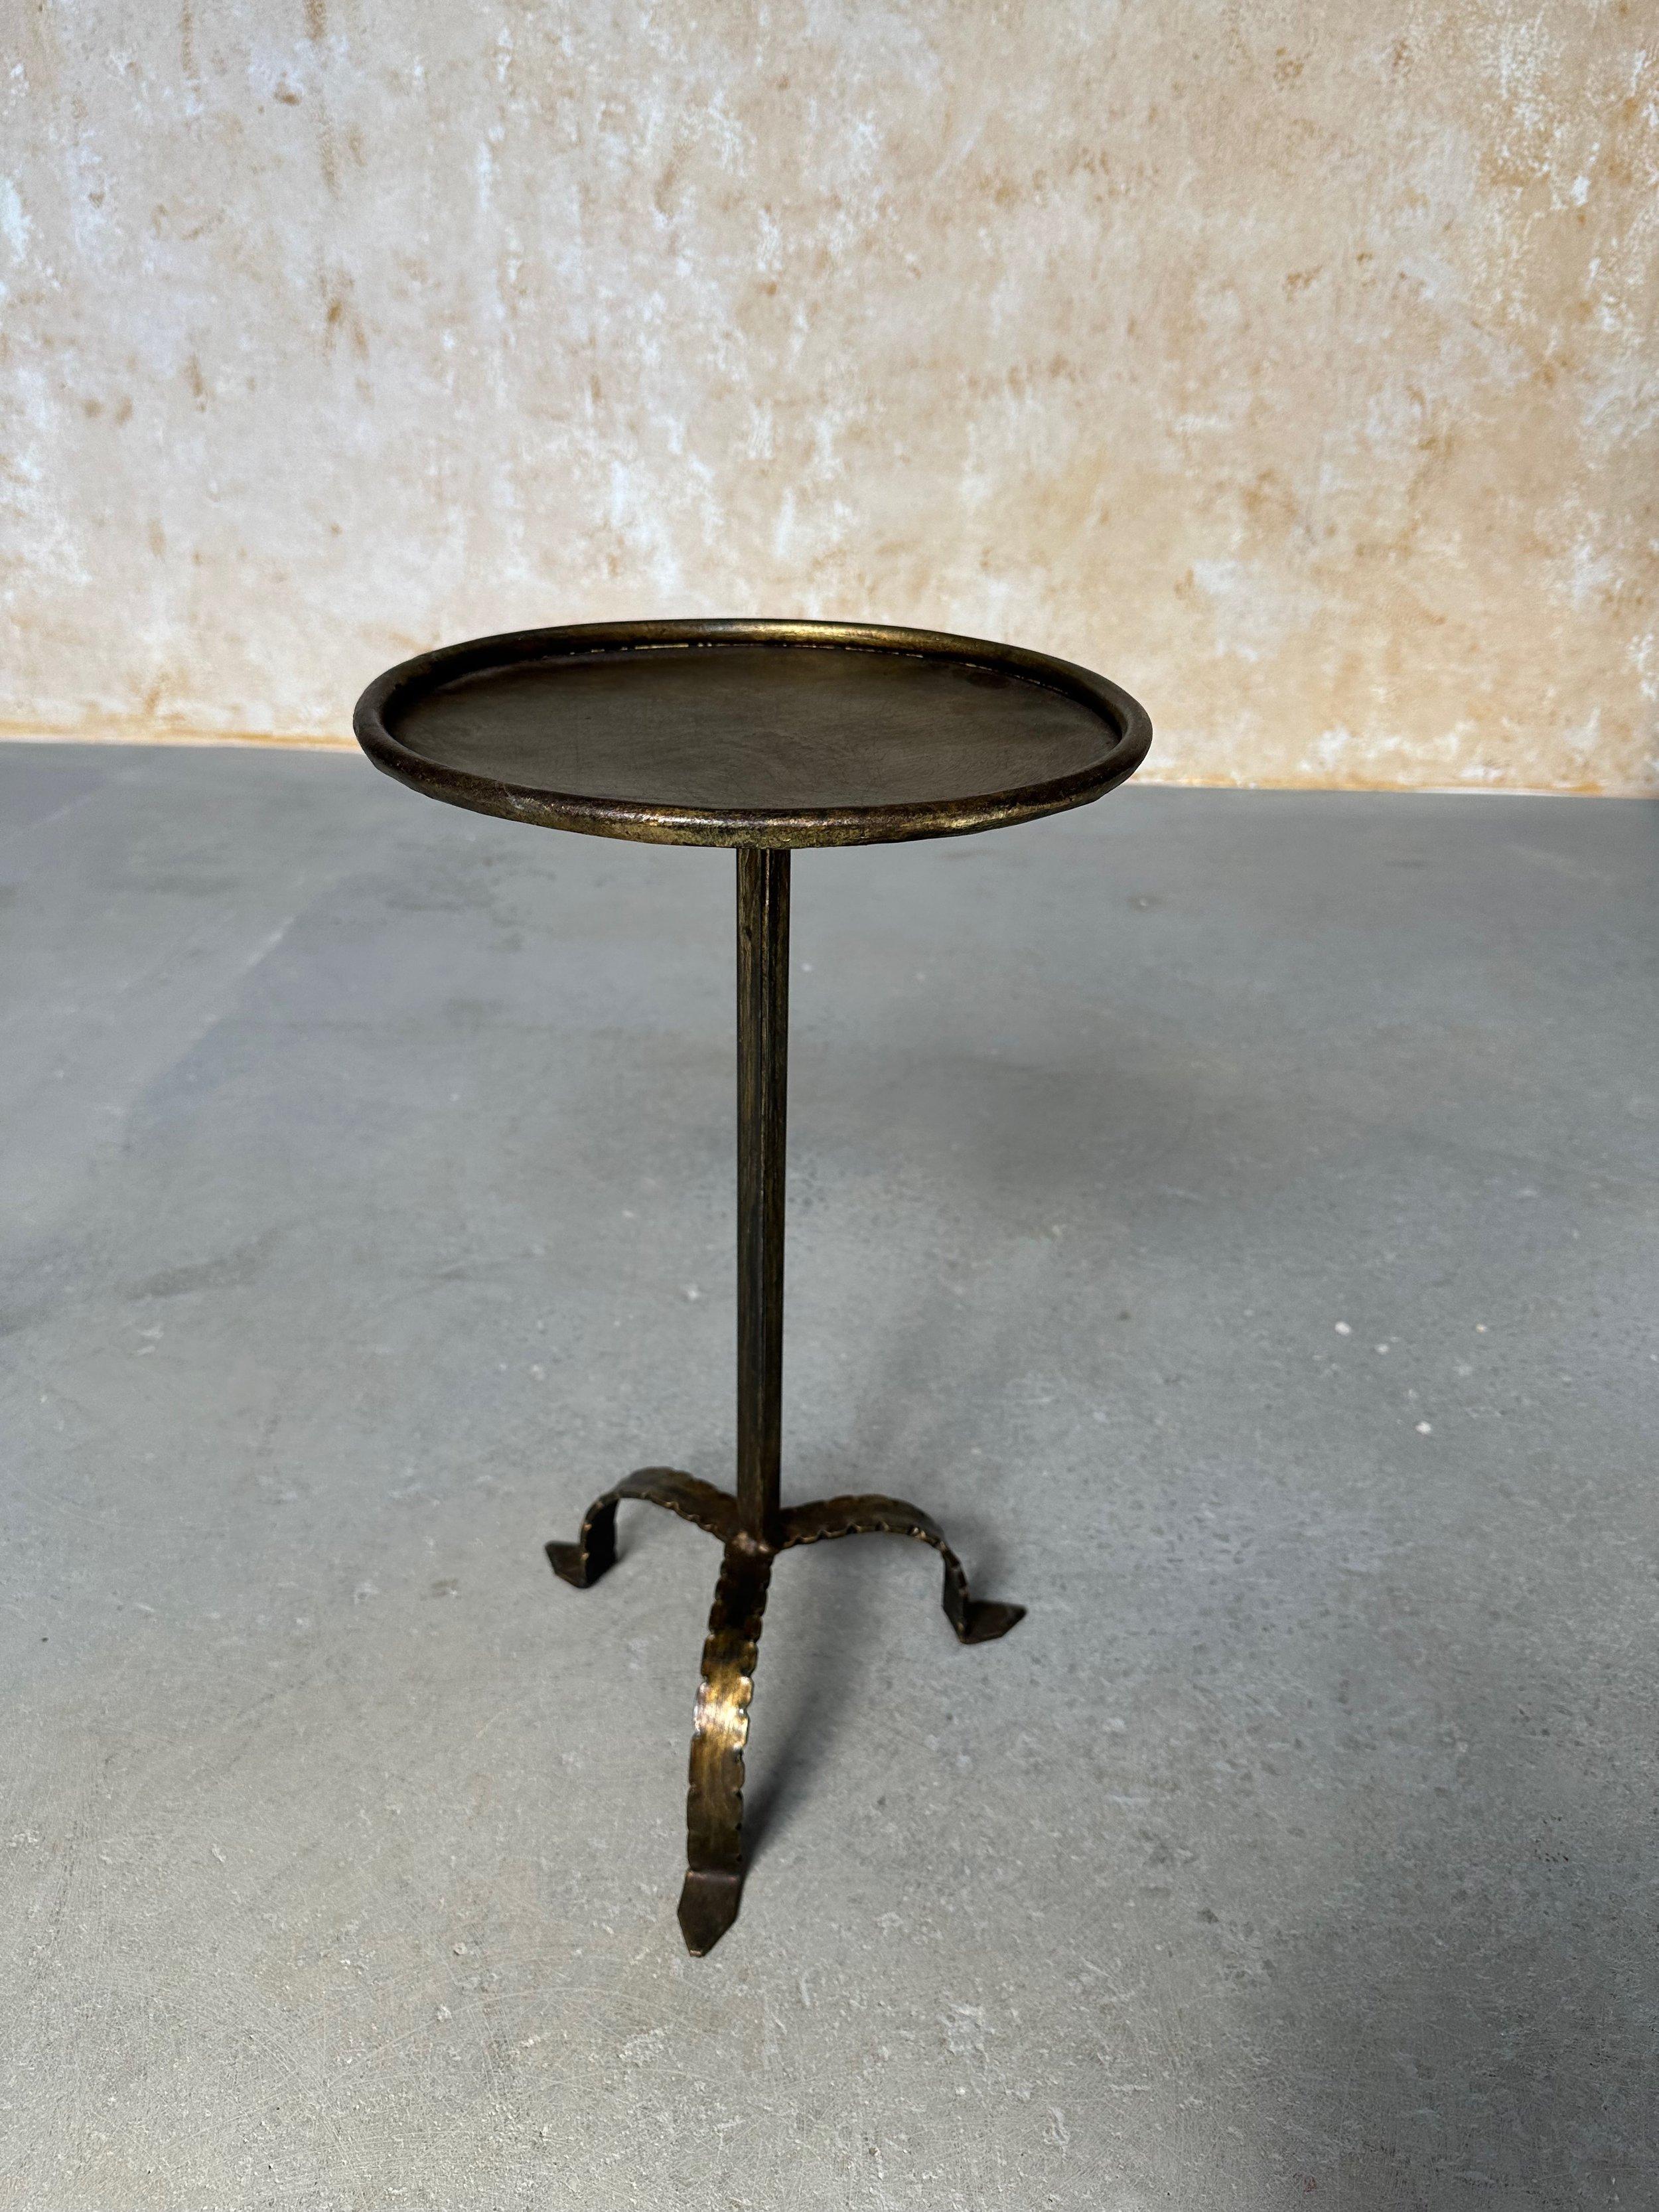 This unique small Spanish end table was recently crafted by accomplished artisans using traditional iron-working methods and features an elevated hammered tripod base with pointed feet. The hand-applied gold patina has subtle dark undertones and the